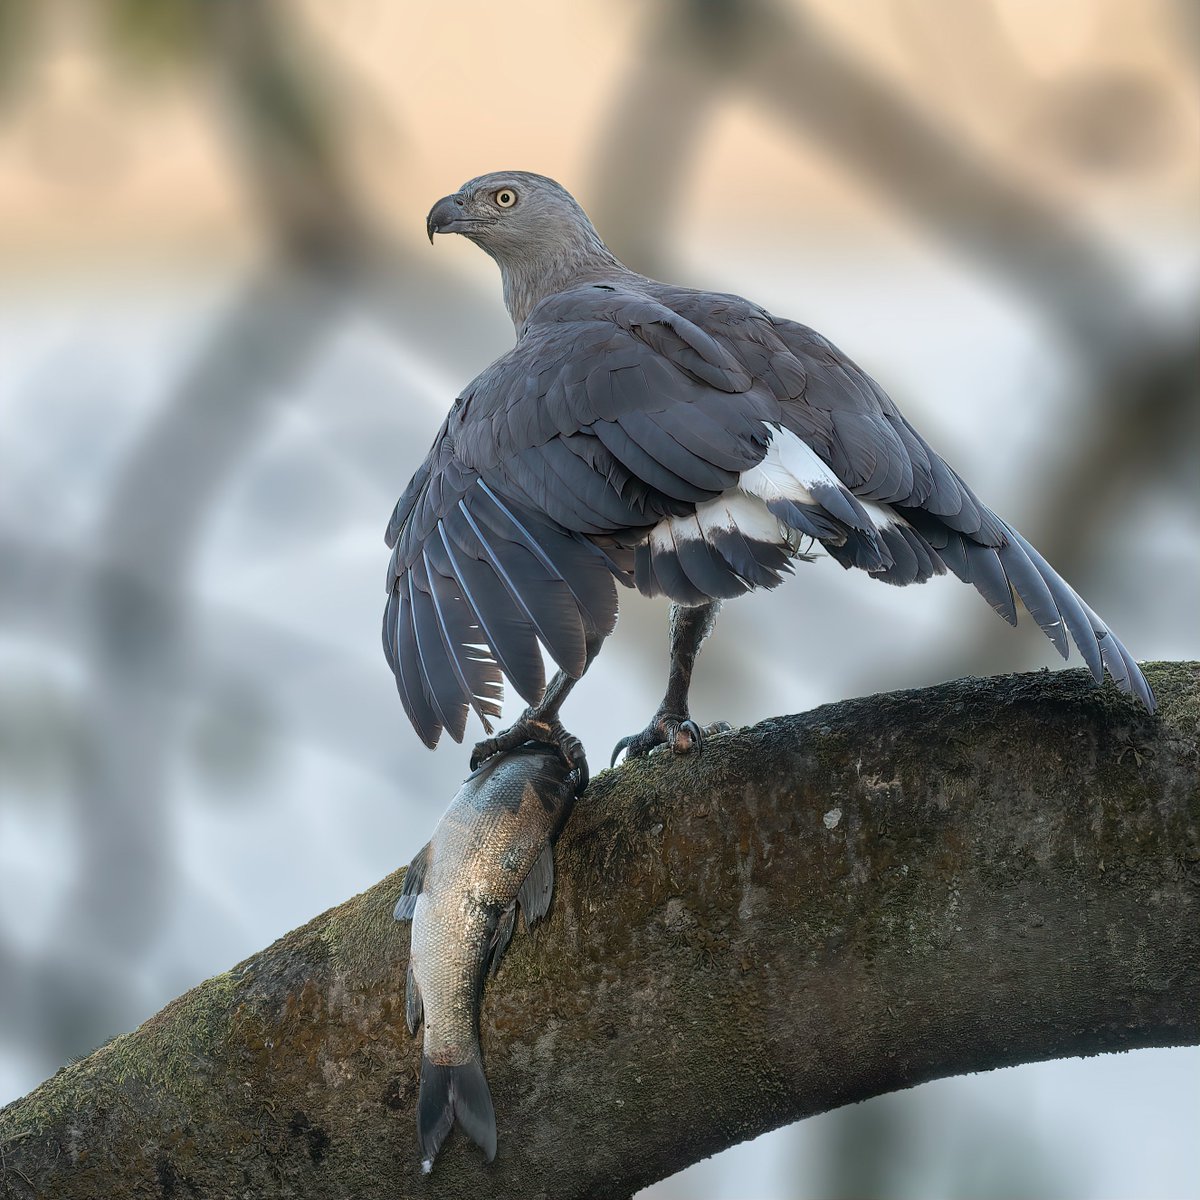 One more for 'Bird With the Food'.  Let's fill the X with your bird pic with food.

Grey-headed Fish Eagle

#IndiAves #ThePhotoHour #BirdWithTheFood